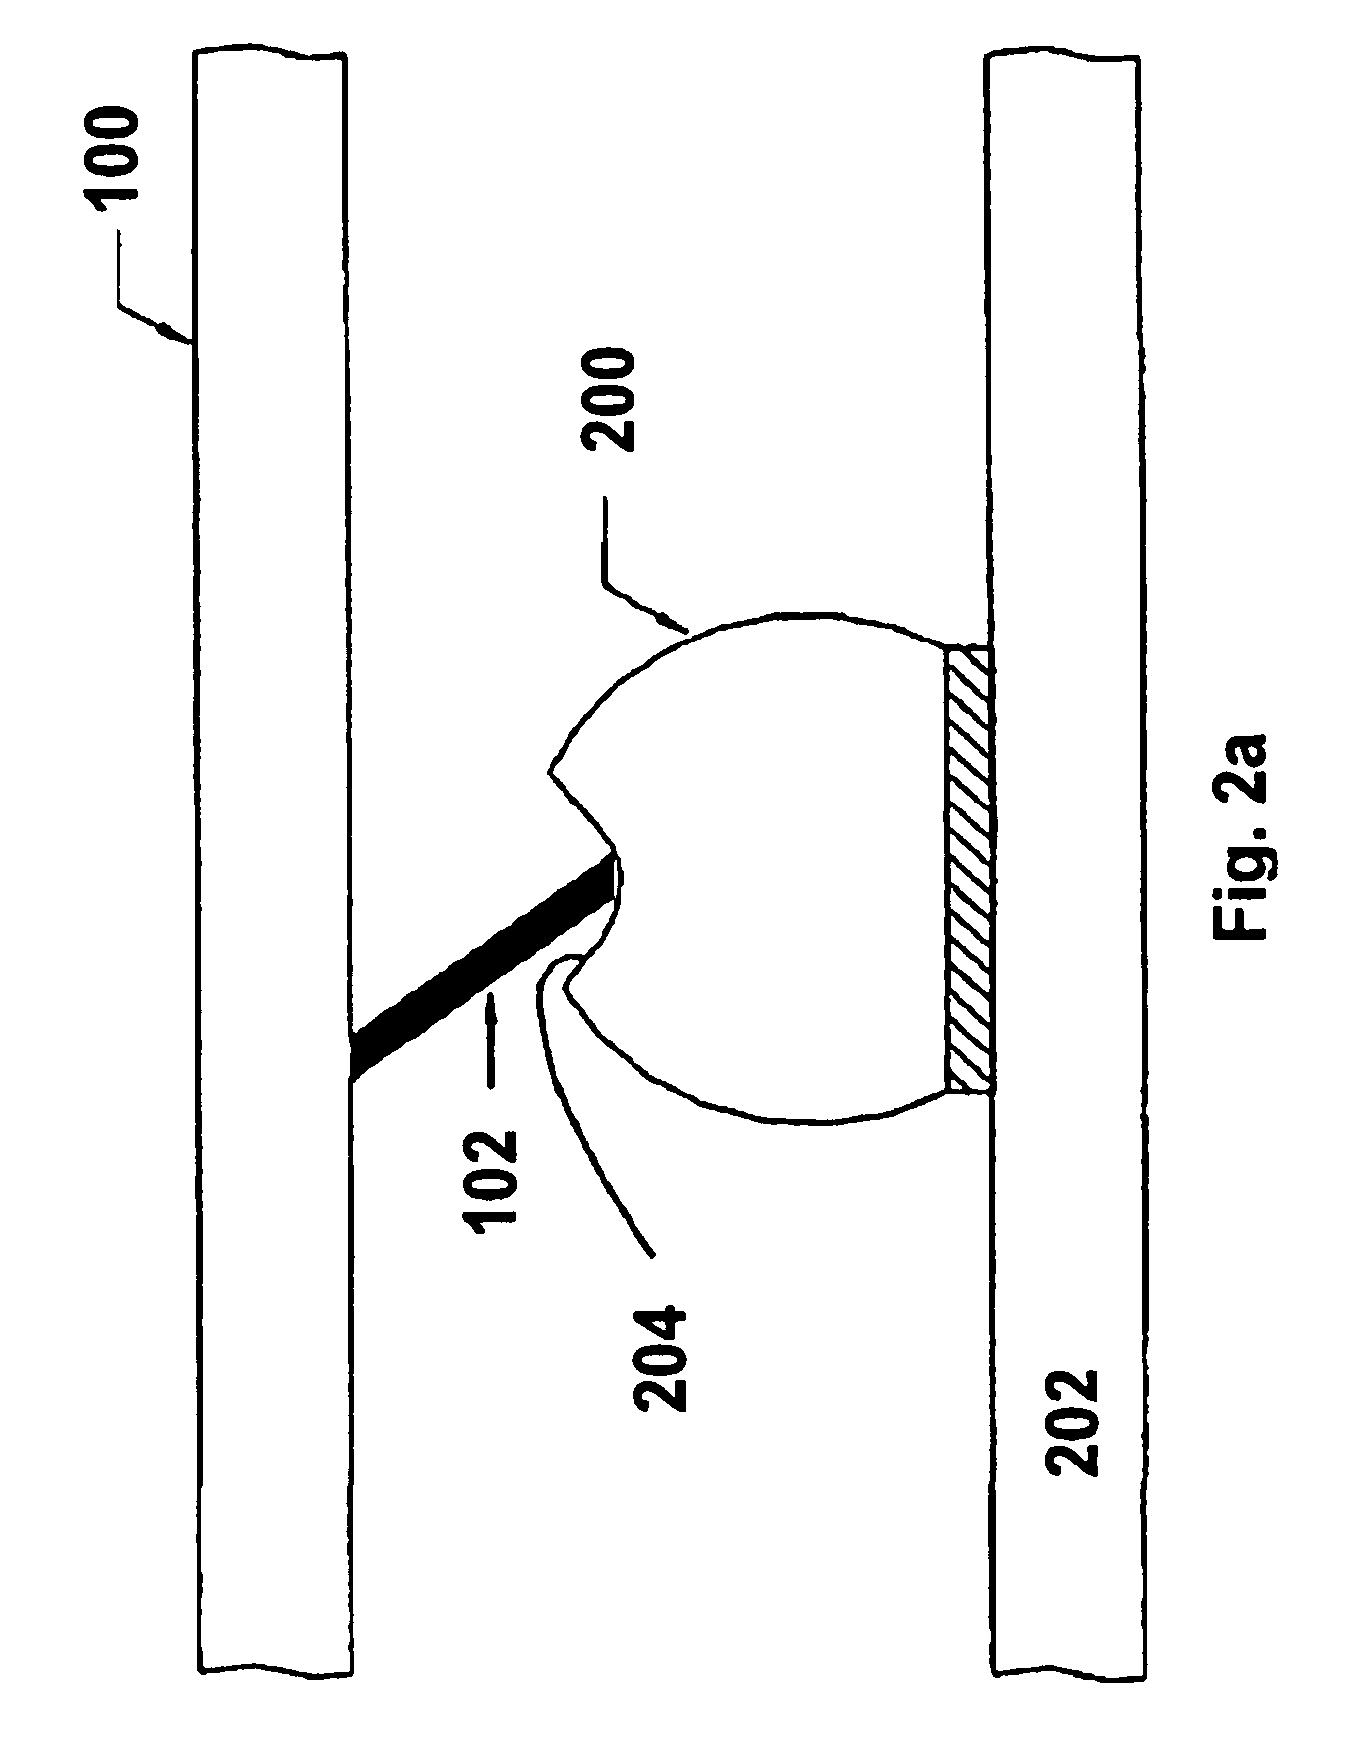 Method and system for batch manufacturing of spring elements